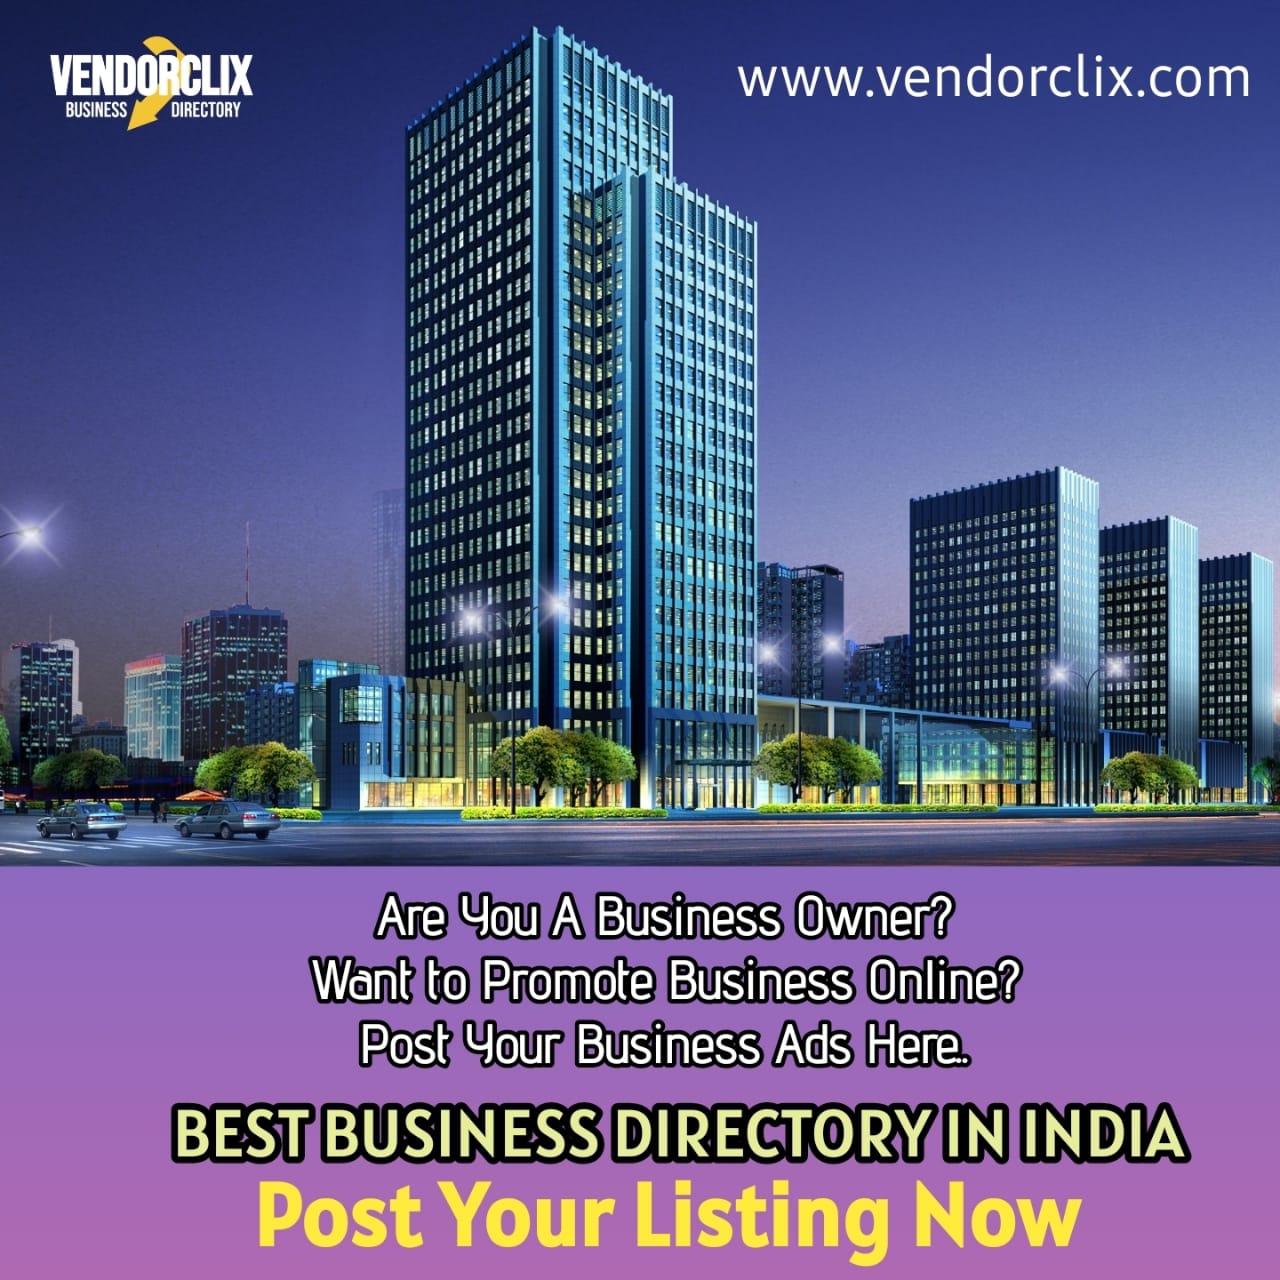 Best Business Directory India, Small Business Listing